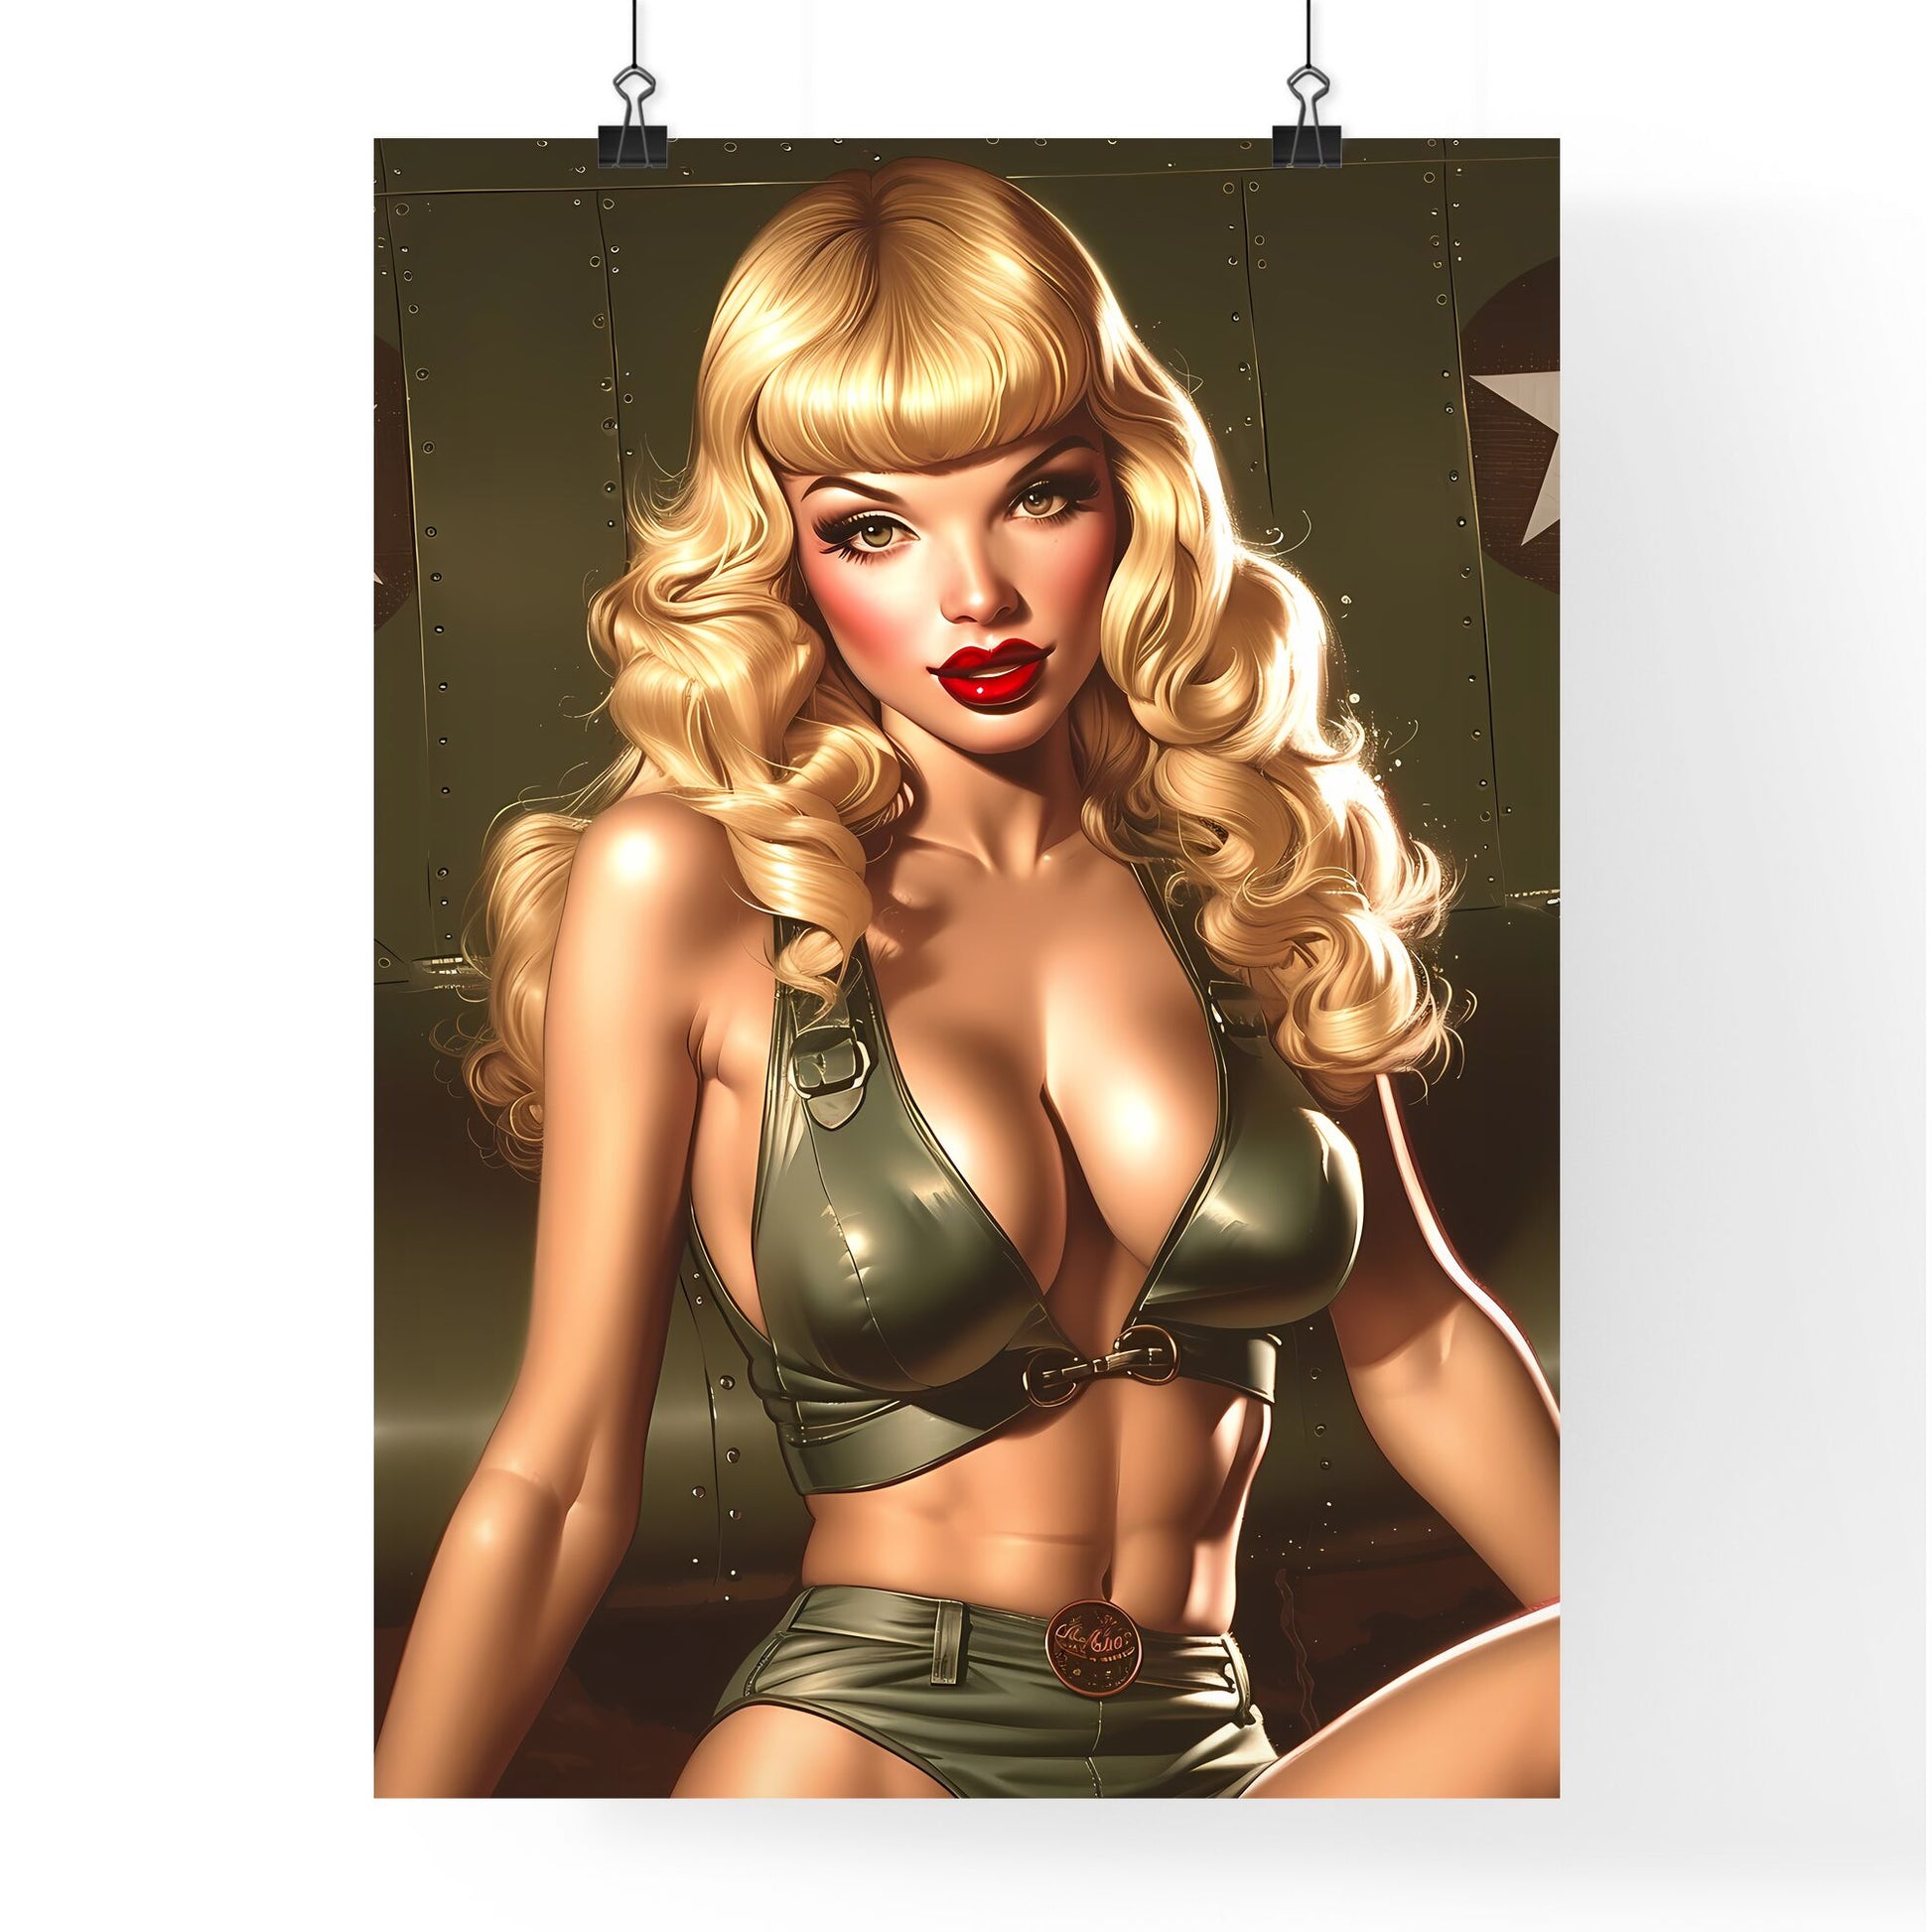 1950's pin up, has blond hair, red lipstick - Art print of a street with colorful buildings and people on it Default Title